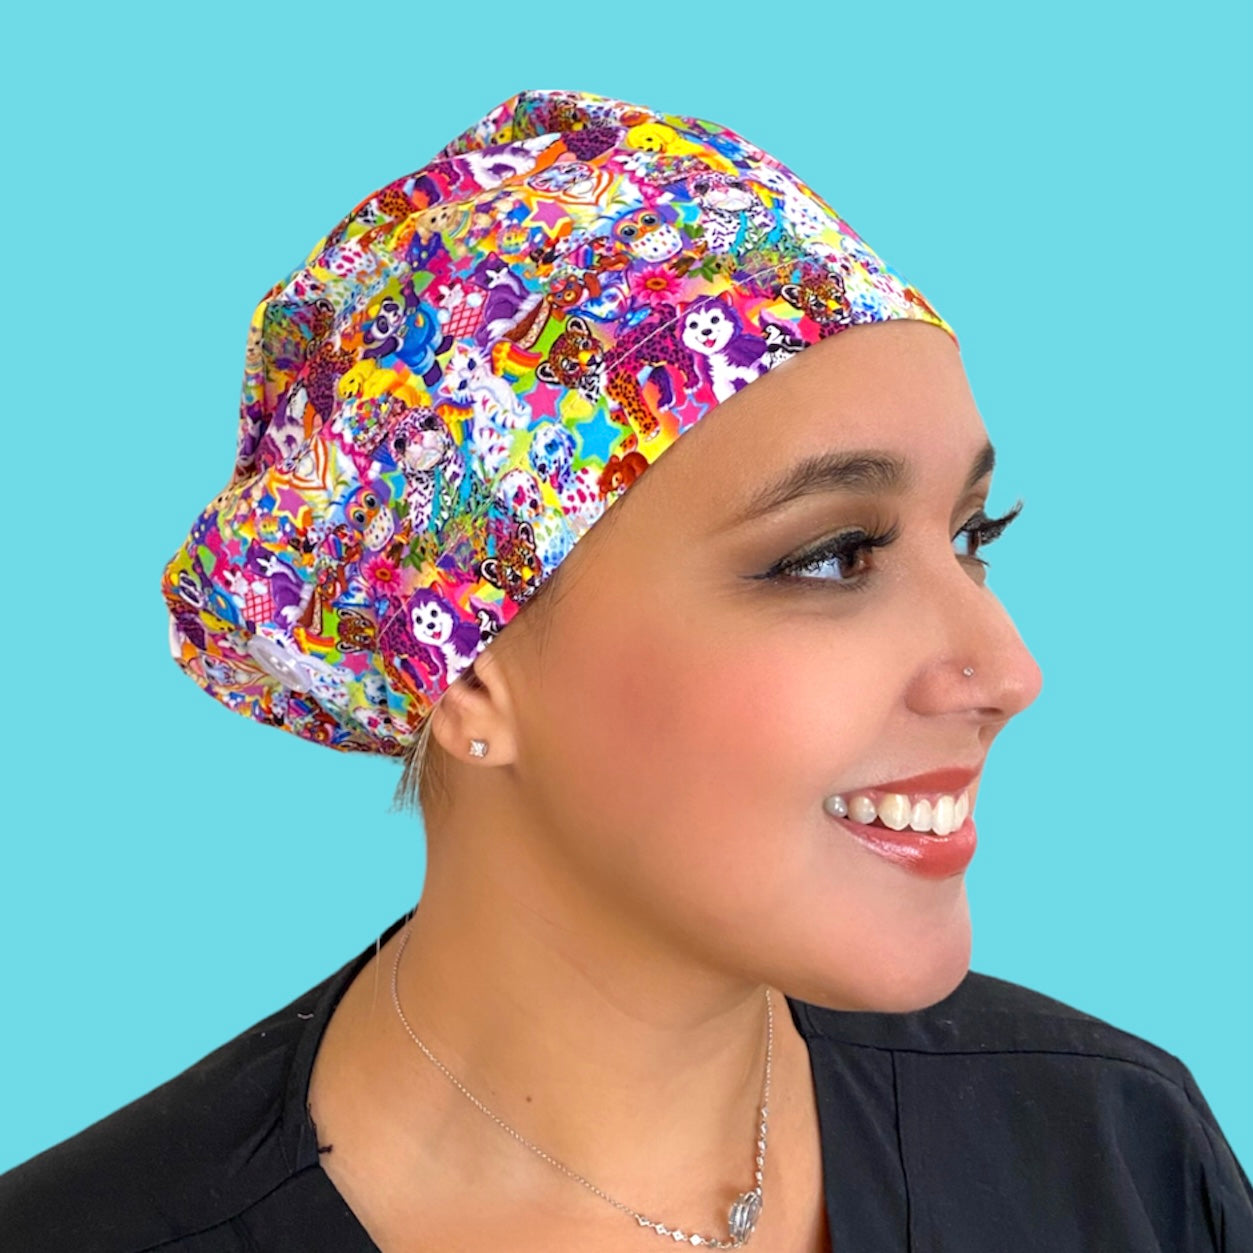 euro 90s lisa frank surgical scrub cap by sunshine shops co. with buttons and satin lining